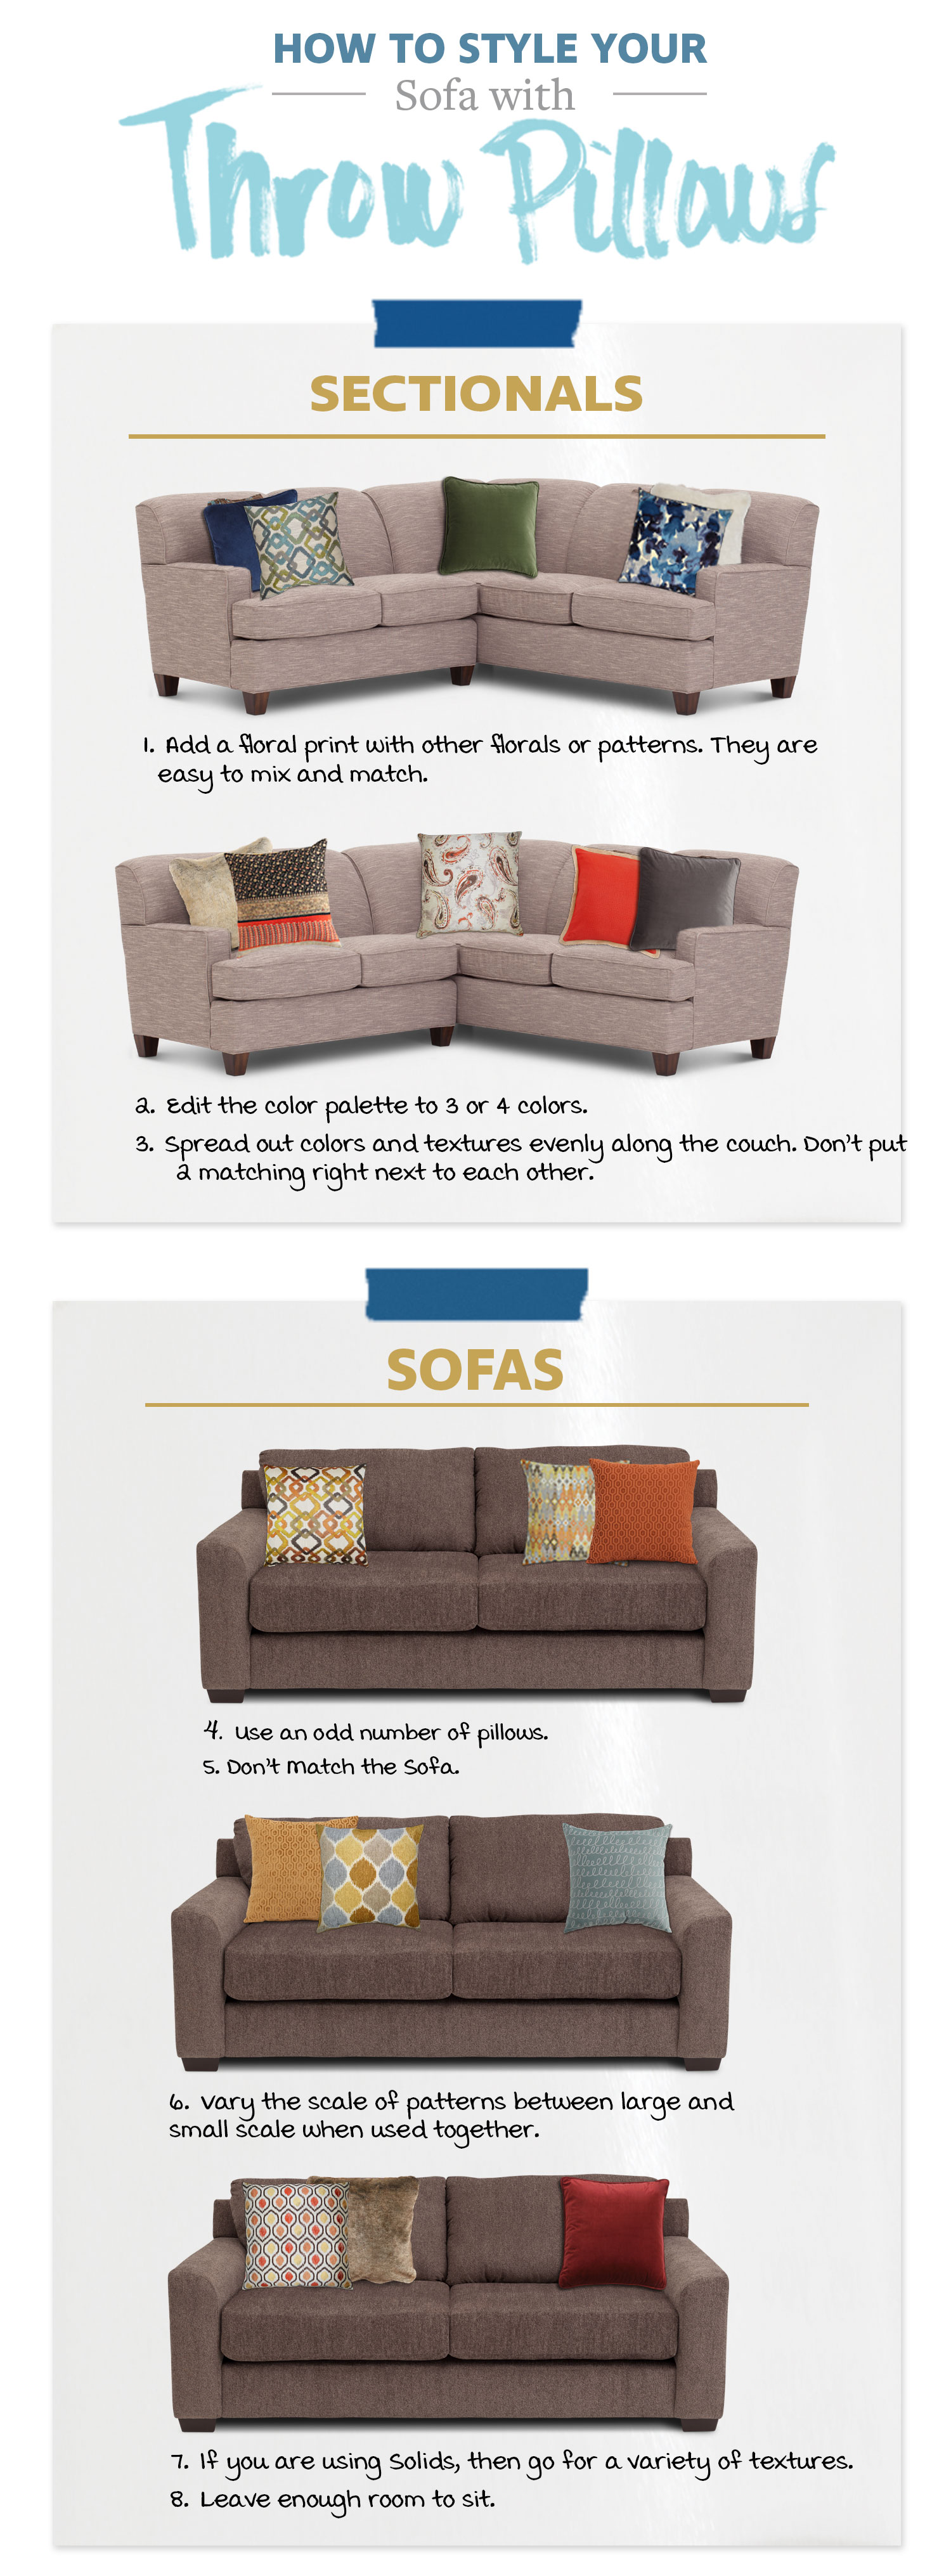 How to Style Throw Pillows Couch